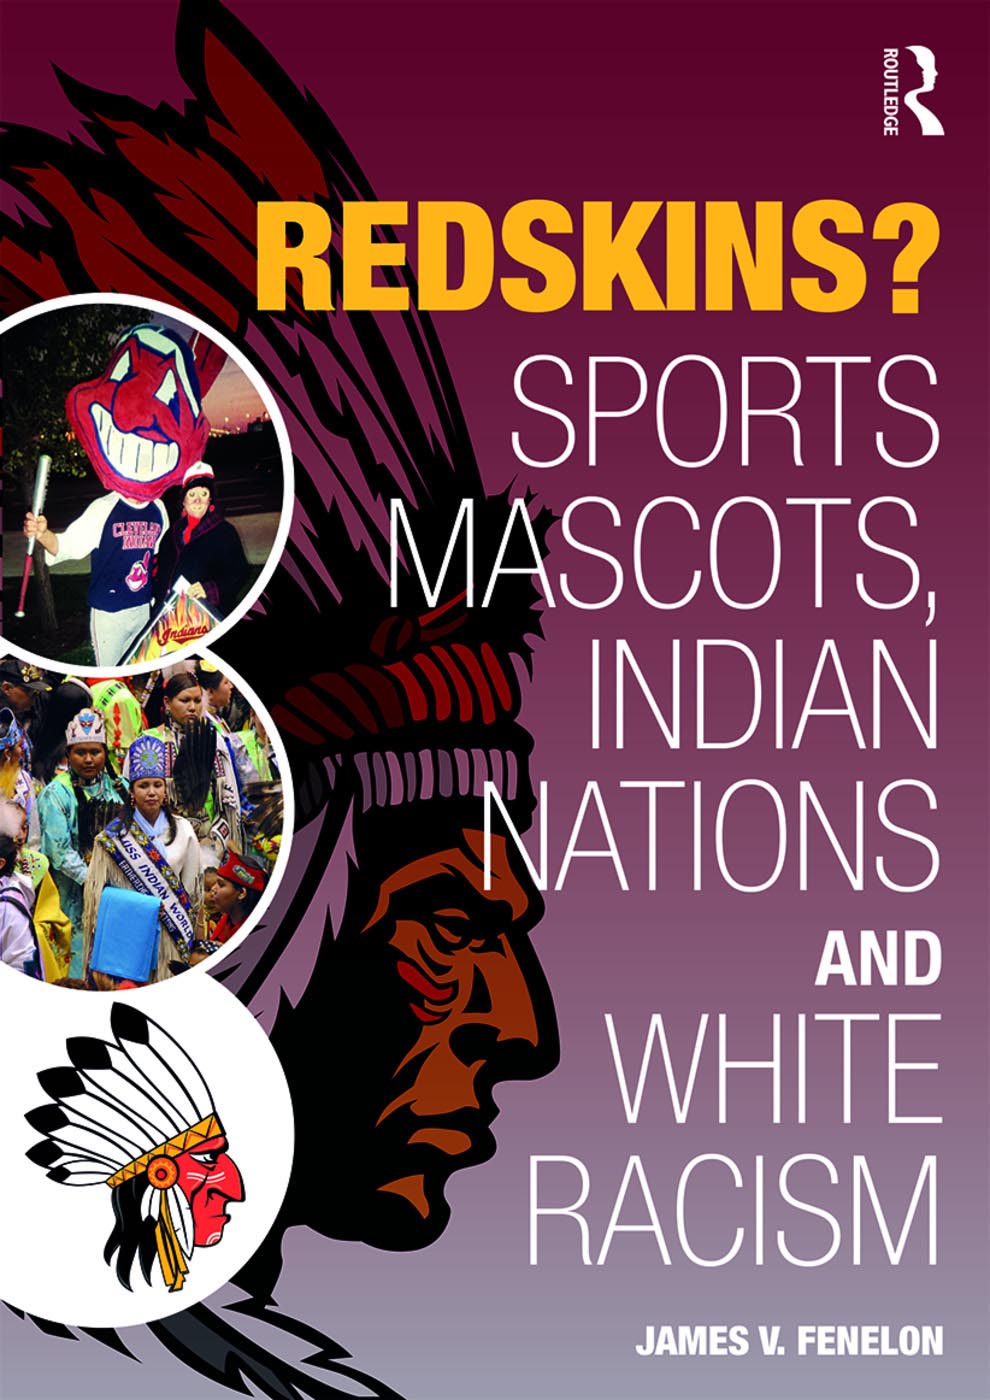  2016 book titled “Redskins? Sports Mascots, Indian Nations and White Racism” 